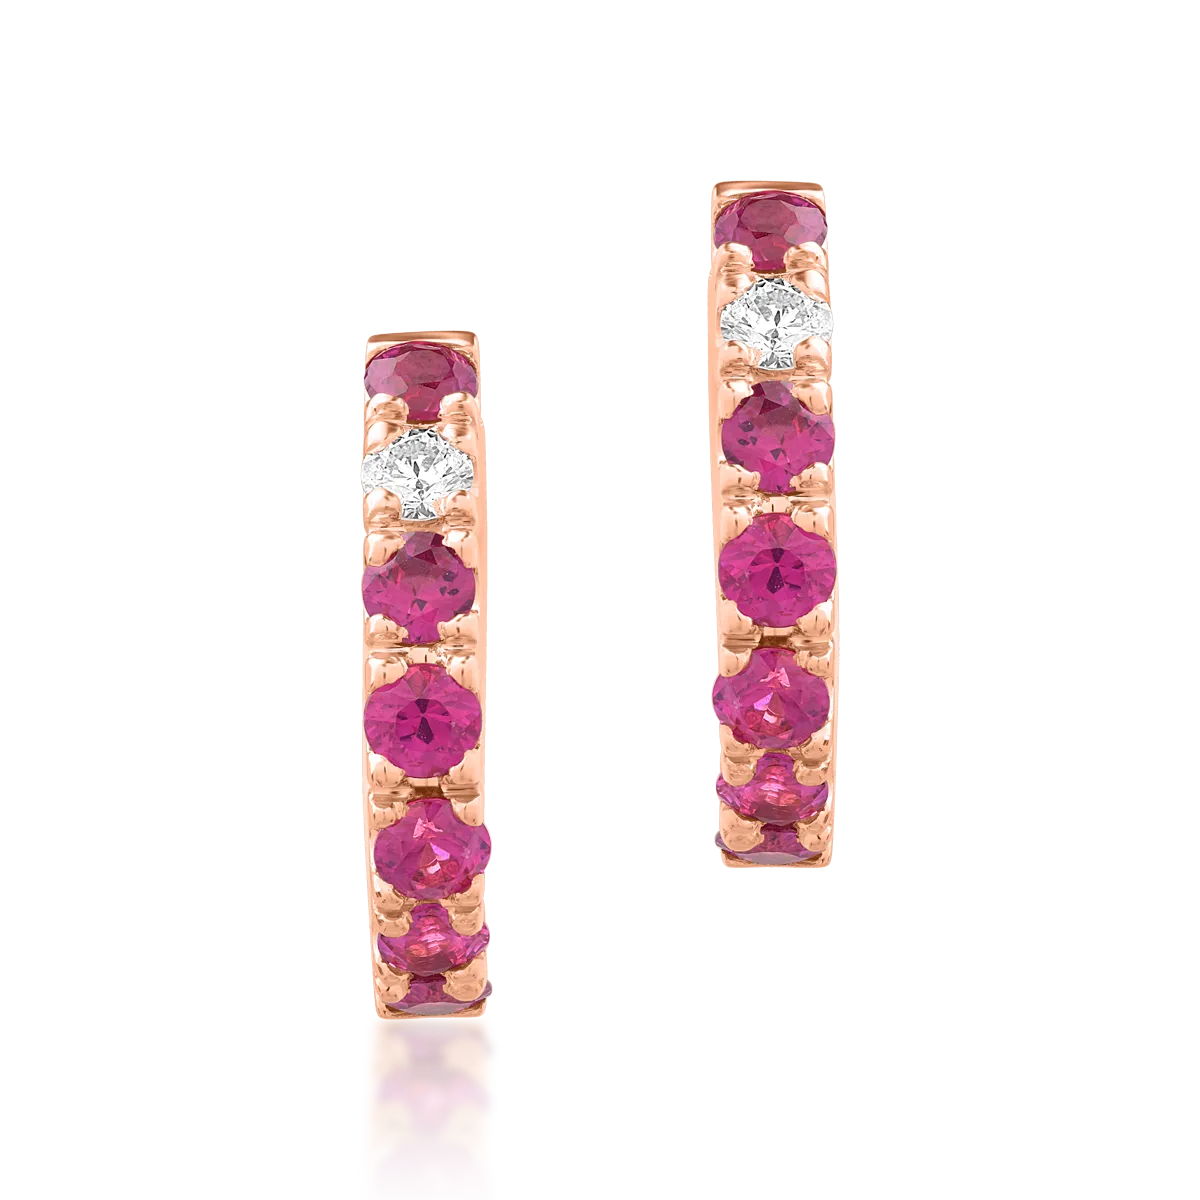 18K rose gold earrings with 0.84ct rubies and 0.1ct diamonds